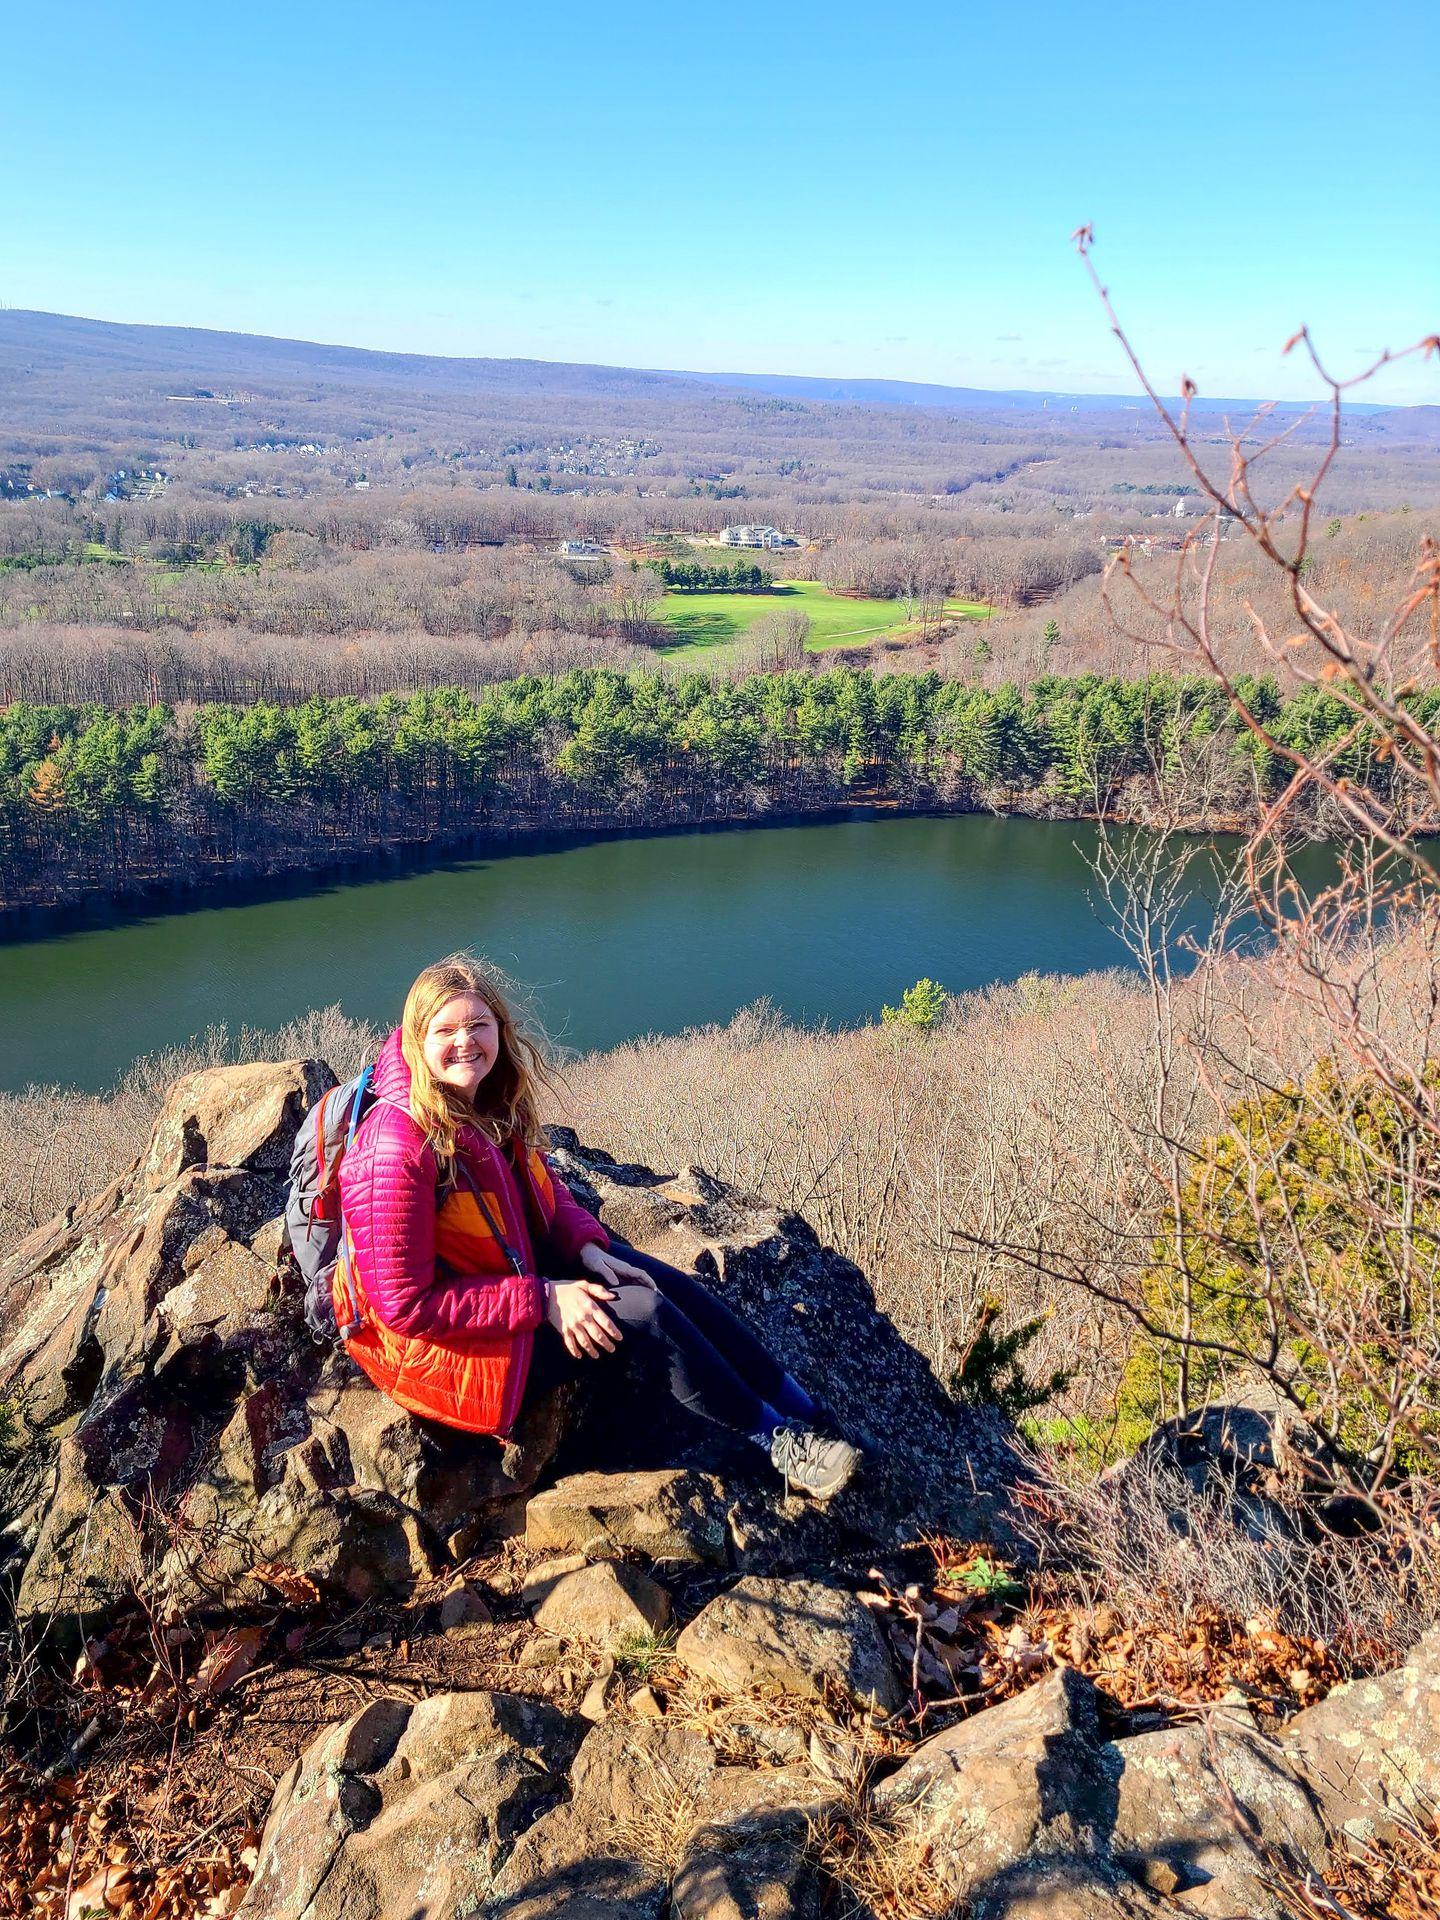 Taken from the top of Chauncey Peak, Lydia sits on a rocky area with views of the lake and the surrounding valley behind her.